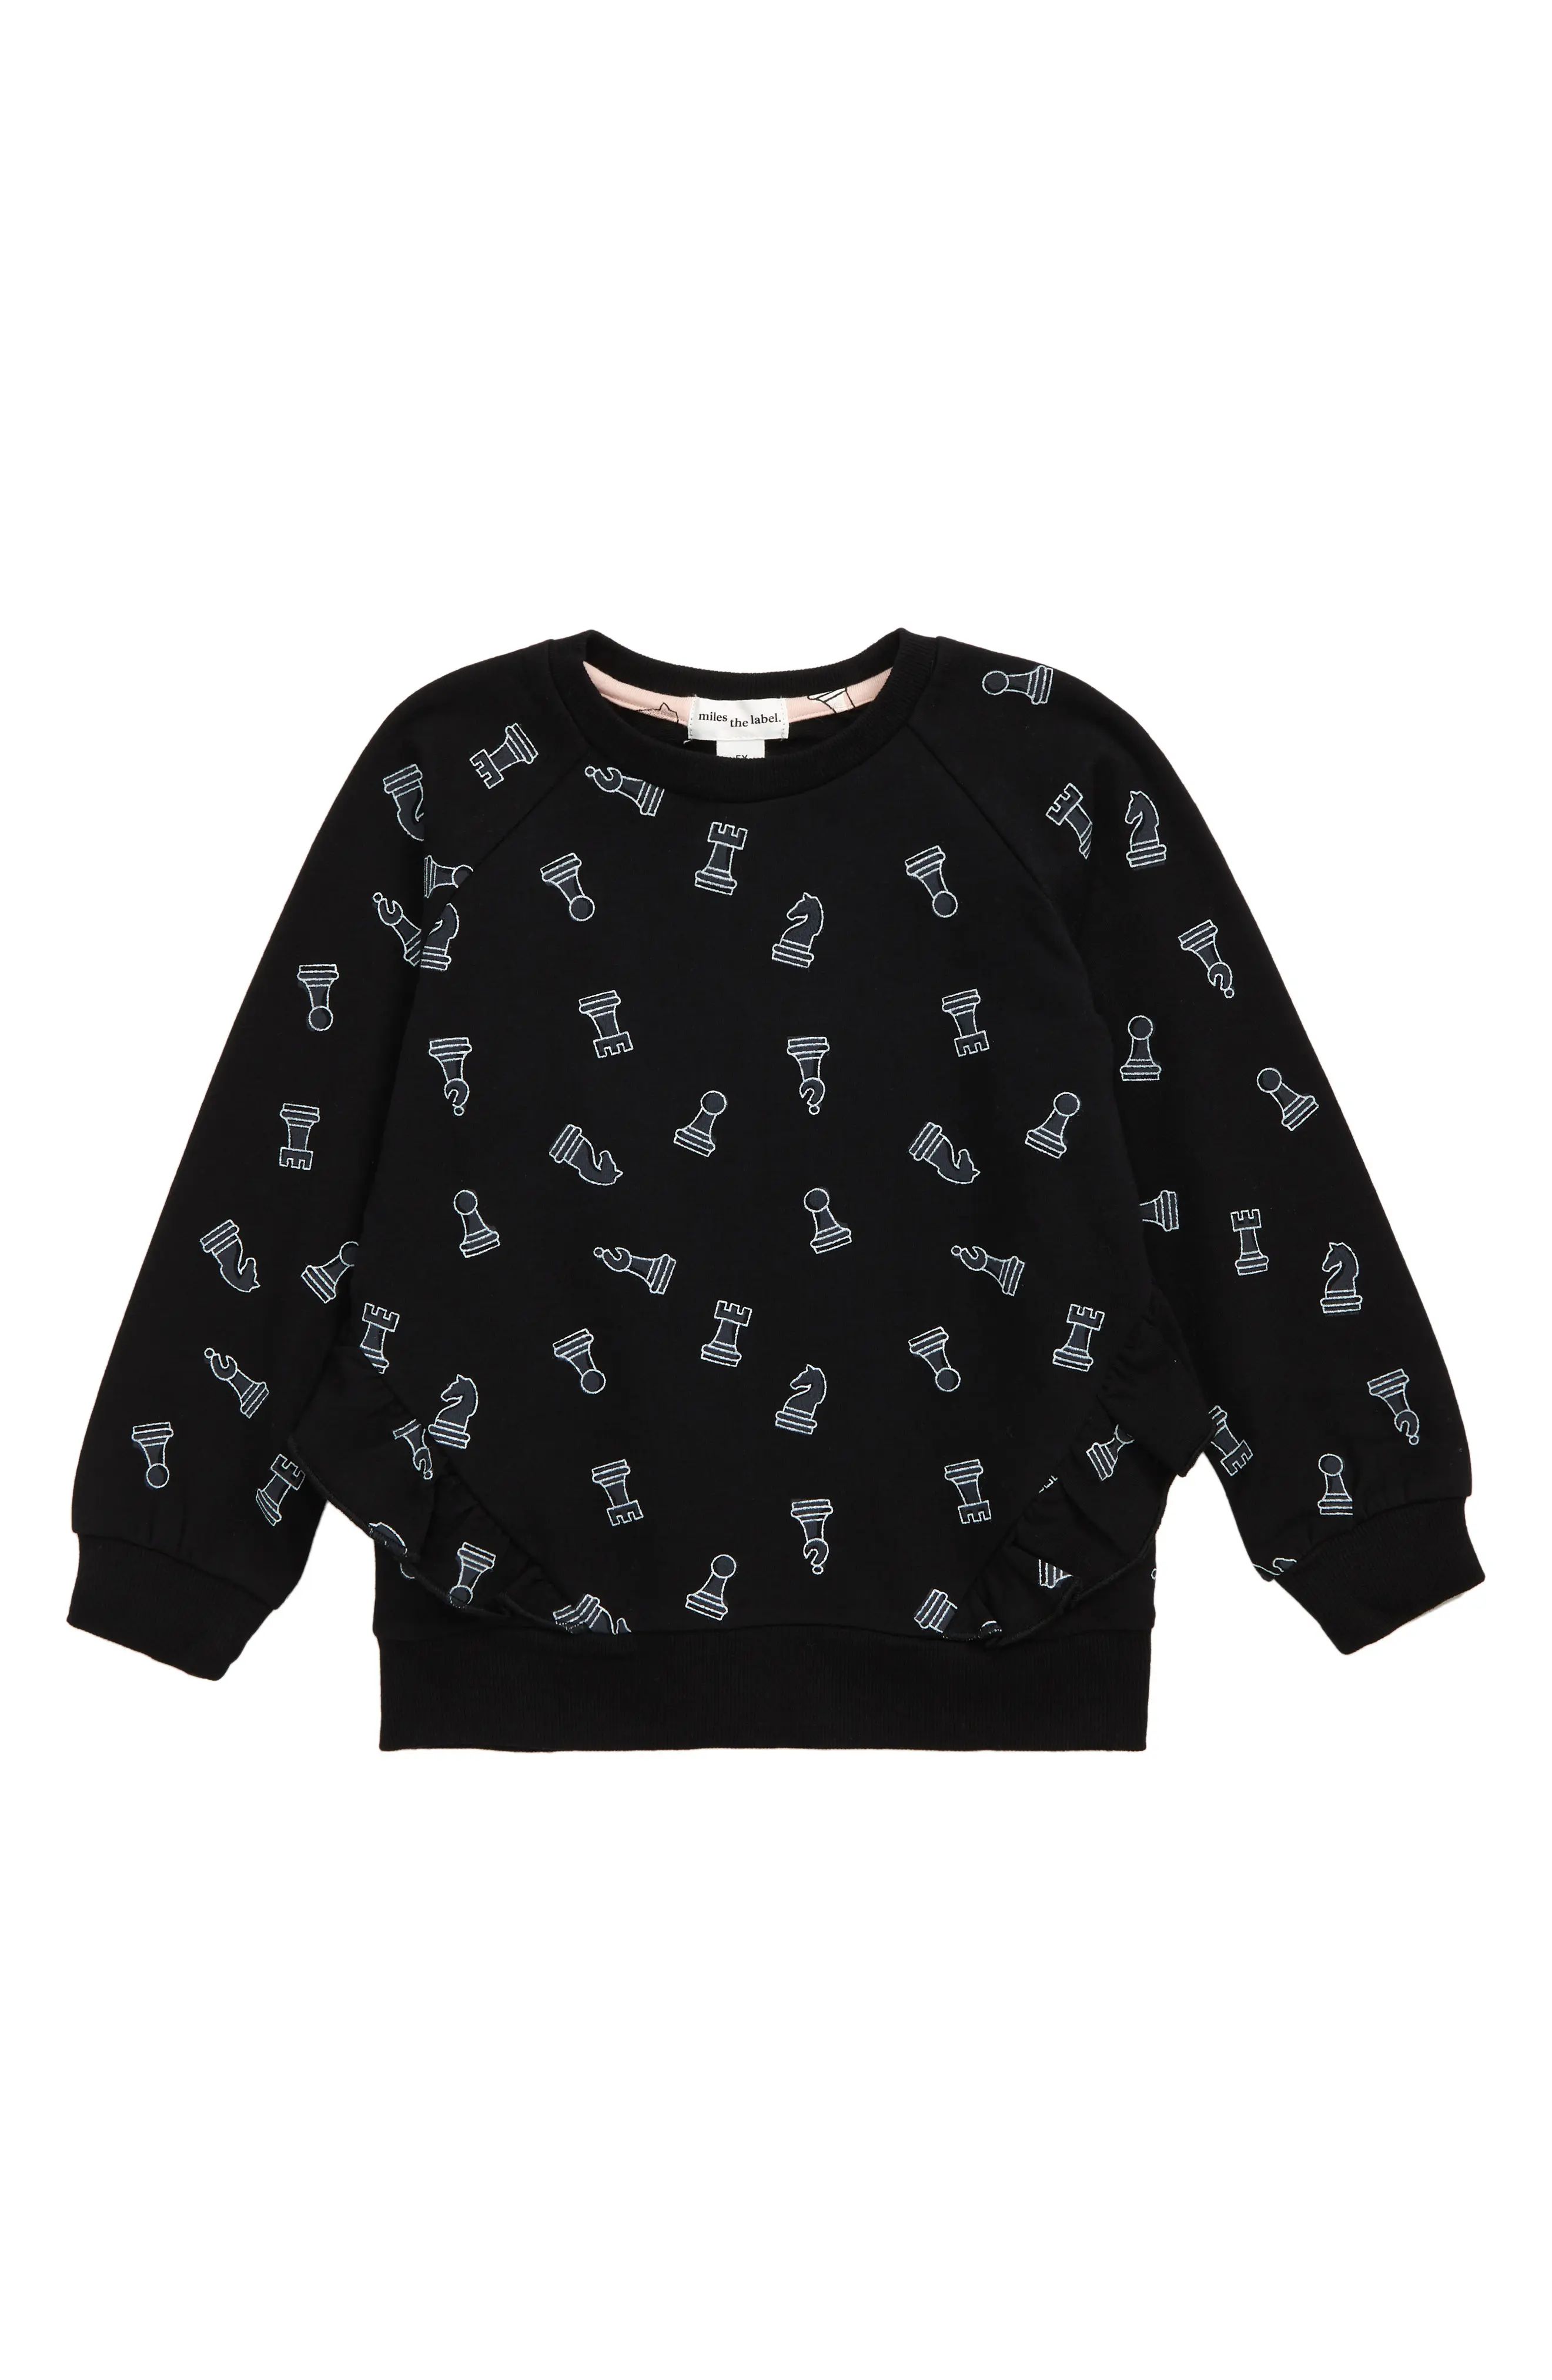 MILES THE LABEL miles Kids' Chess Print Sweatshirt in Black at Nordstrom, Size 6 | Nordstrom